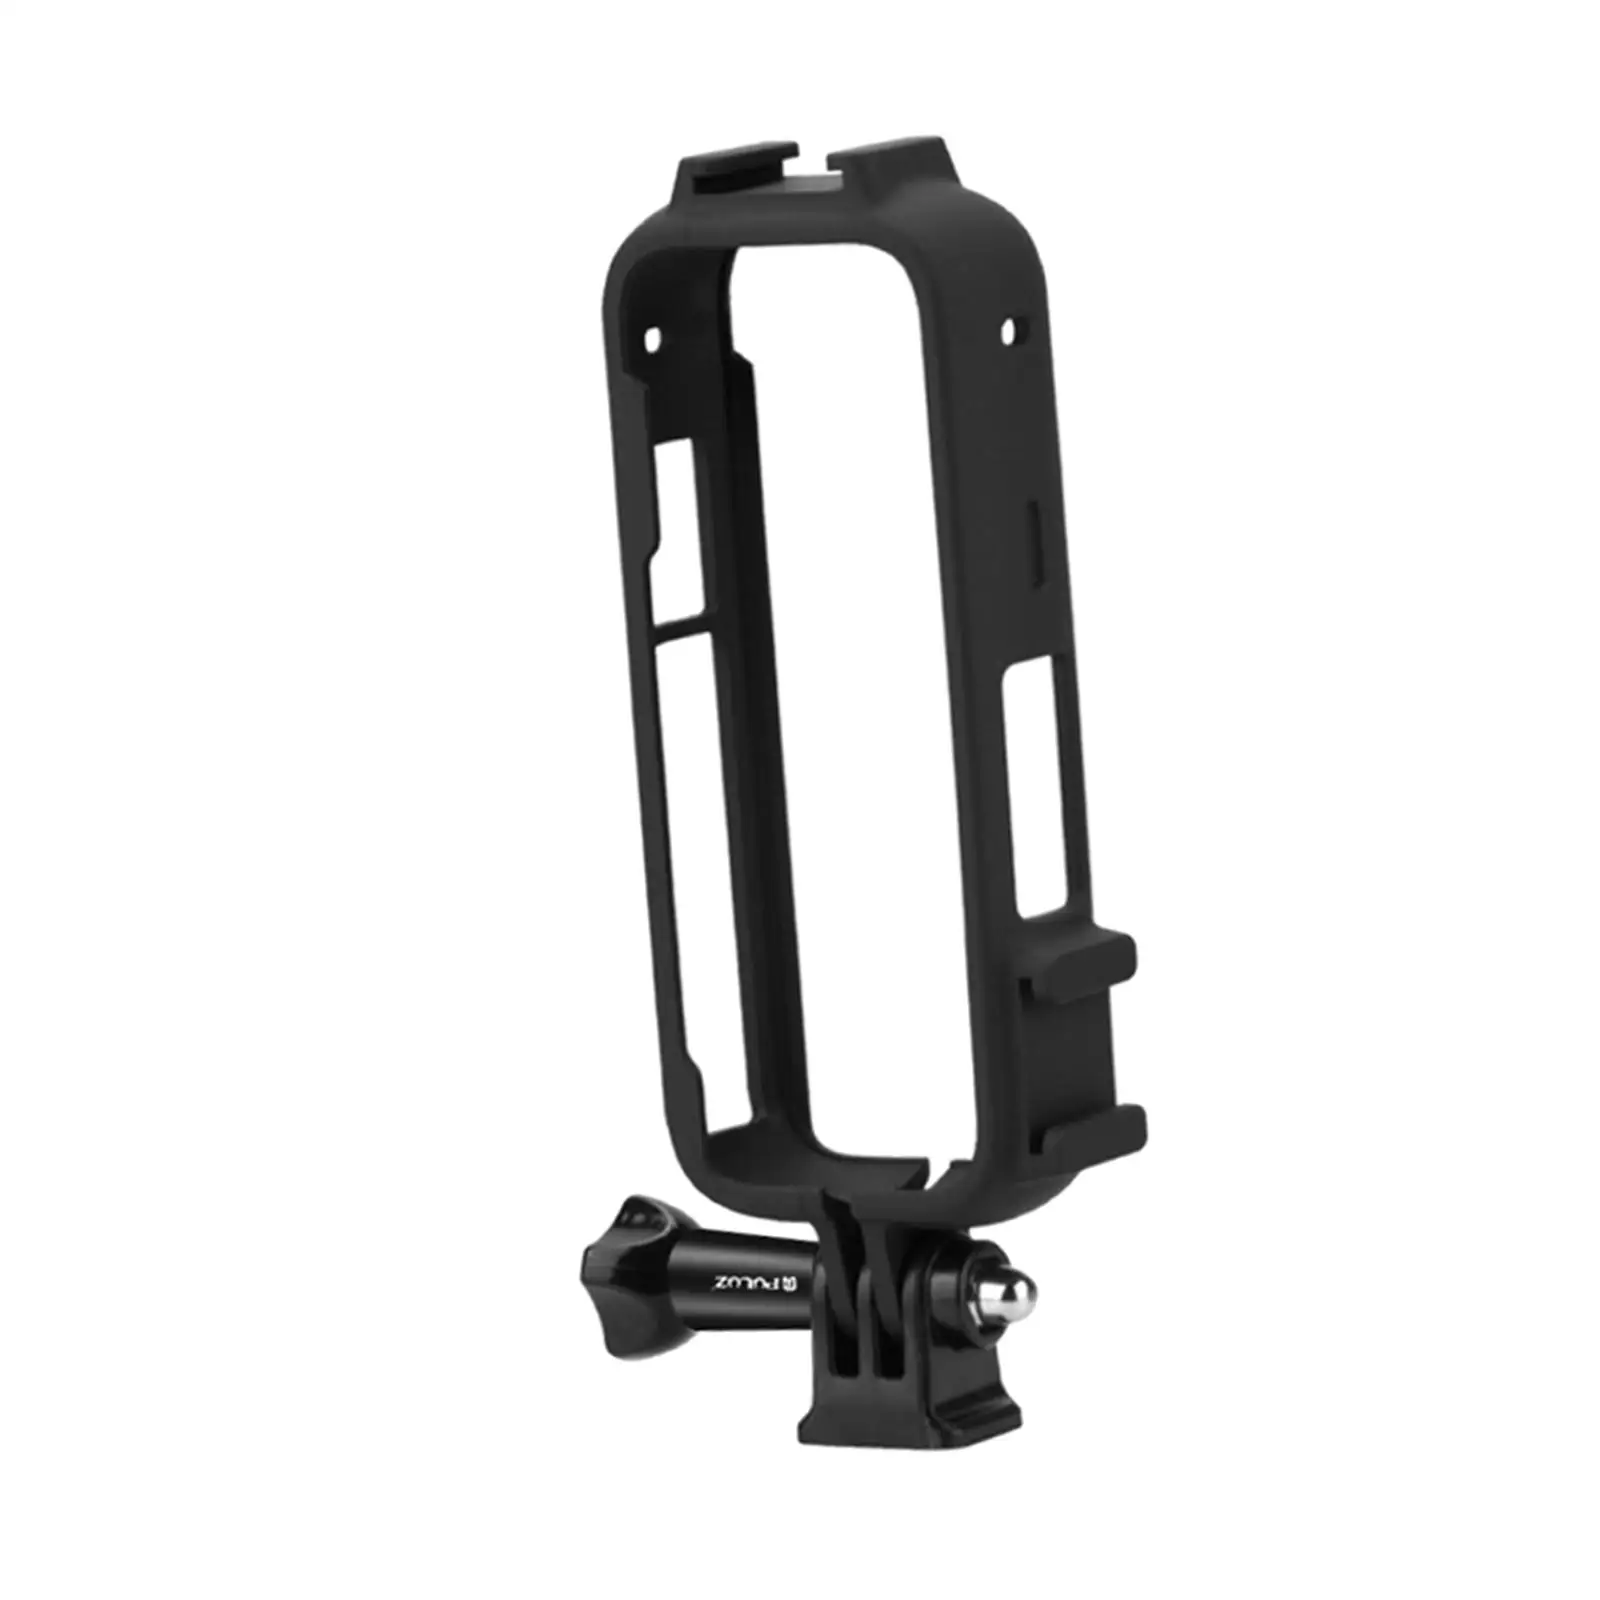 Protective Frame Case with Cold Shoe Mount for One x3 Action Camera Accessories Lightweight